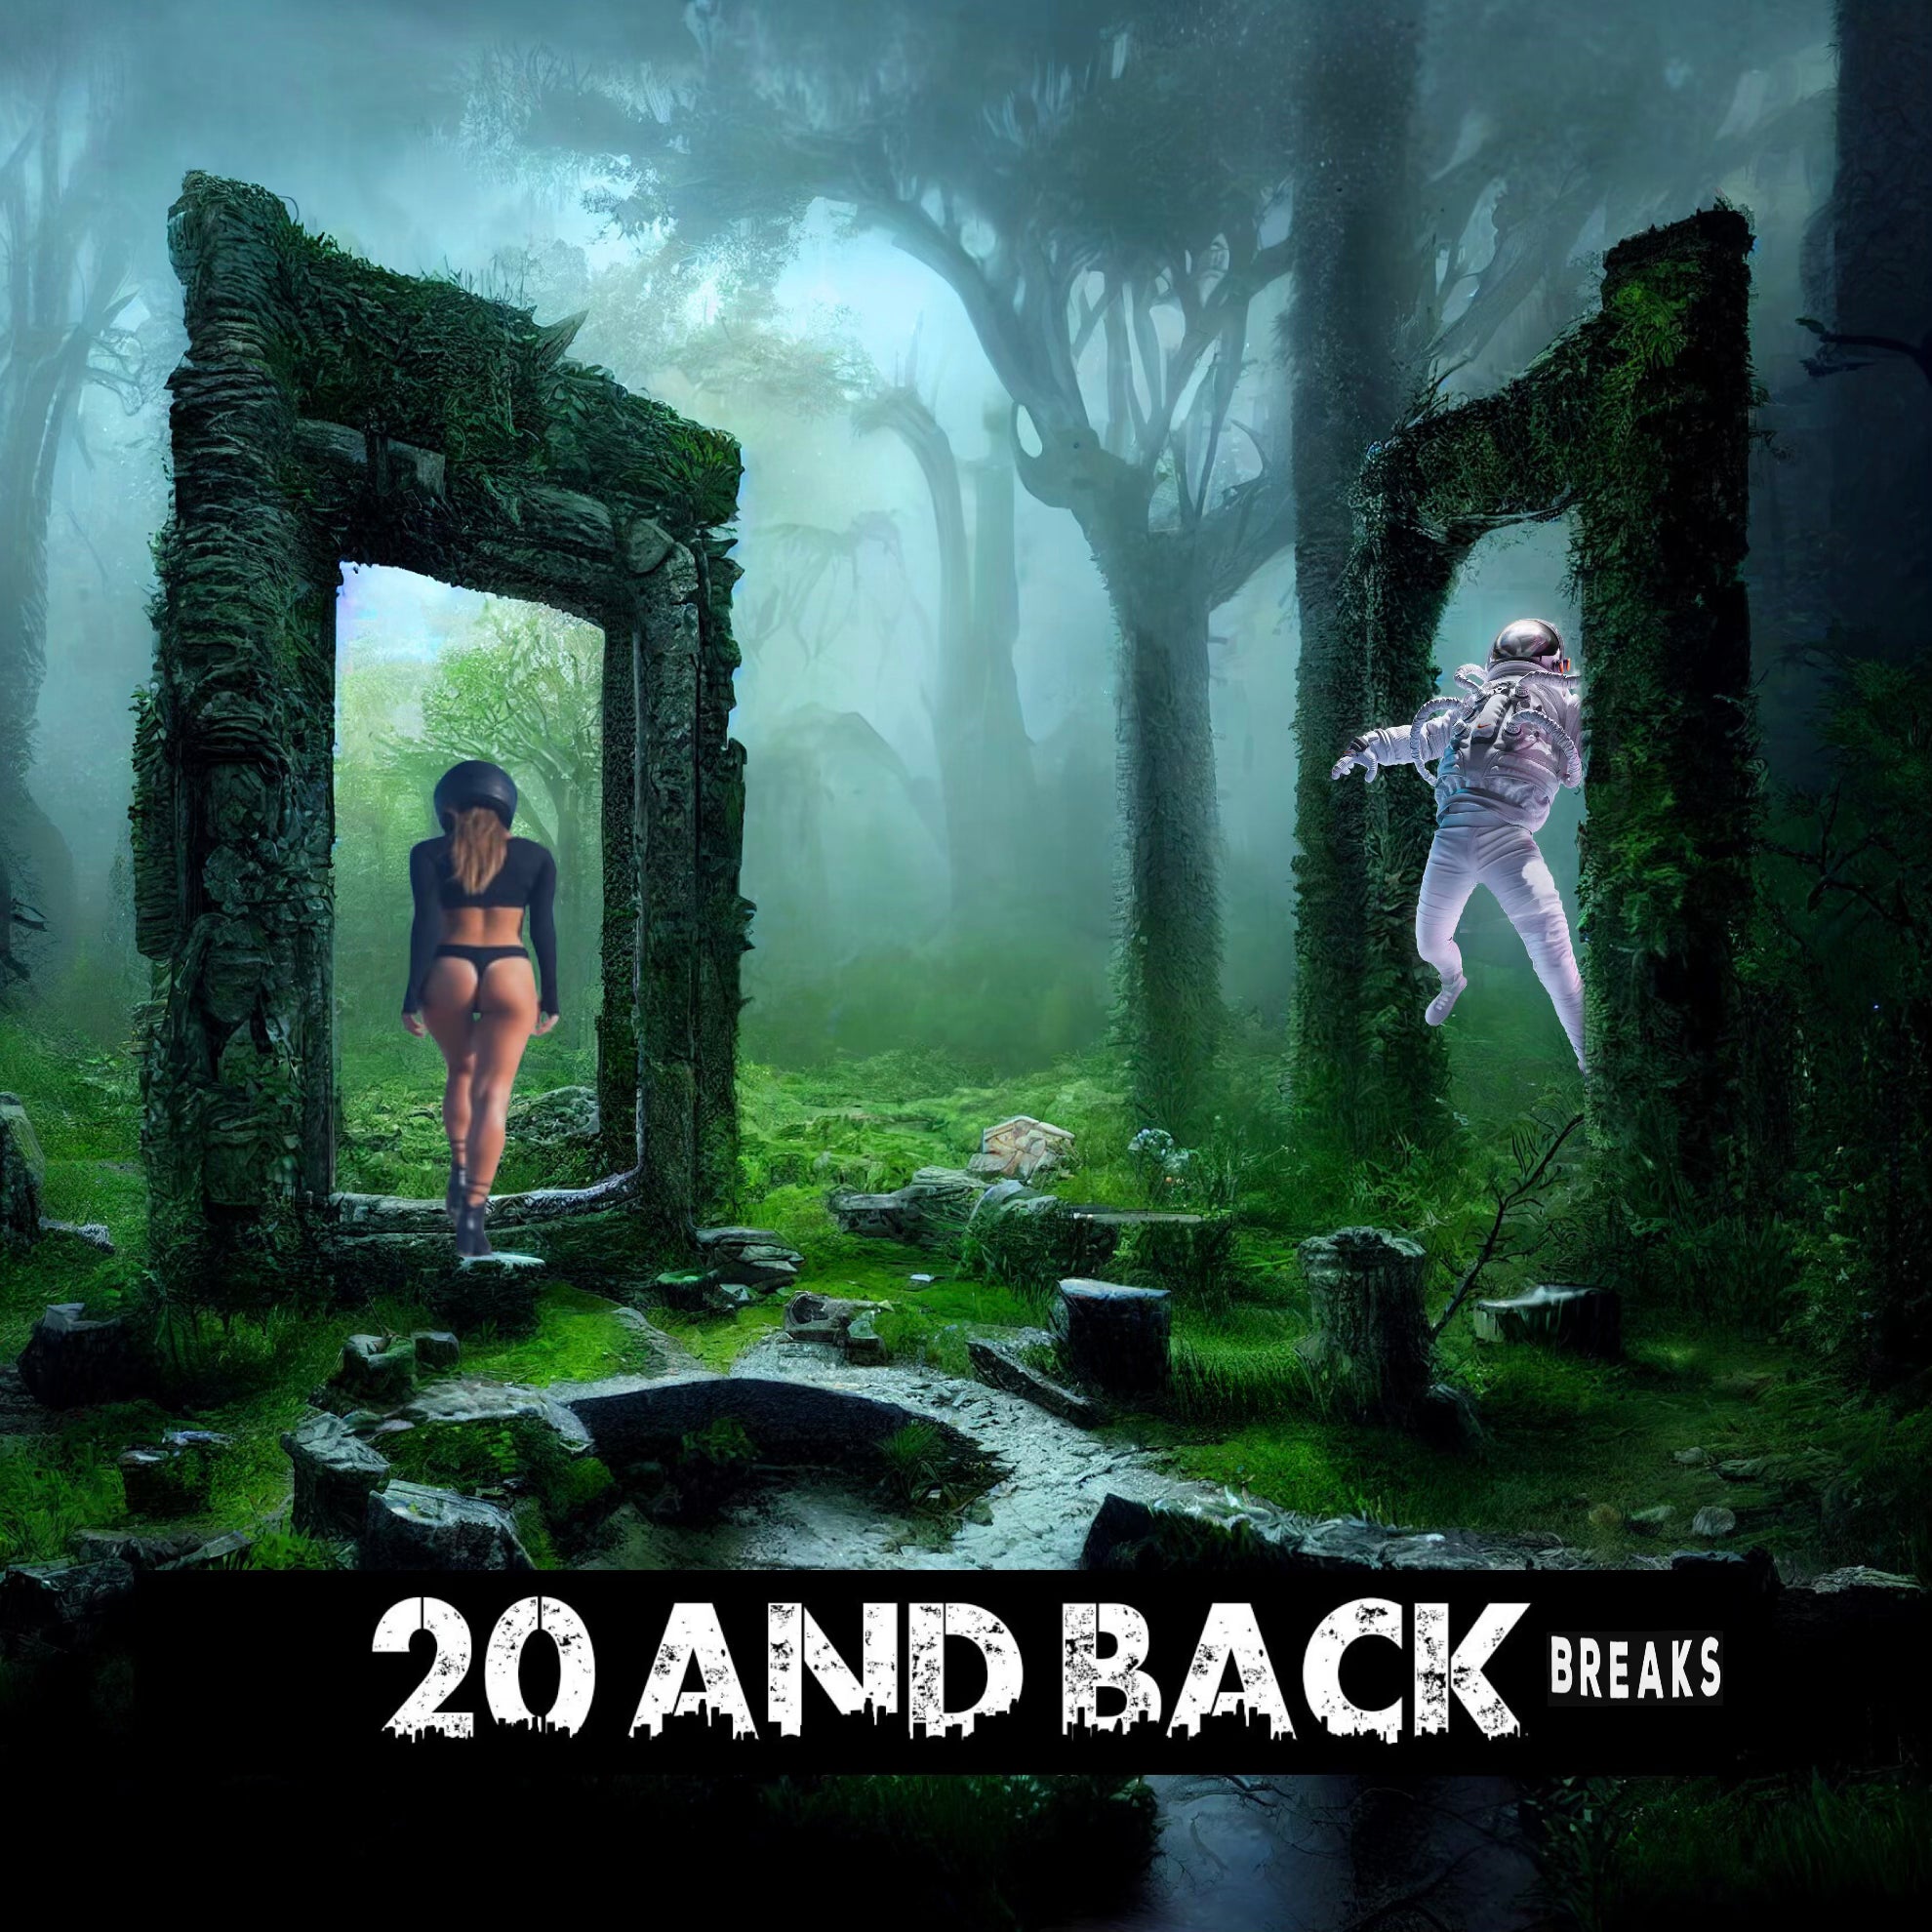 20 & BACK BREAKS! Unreleased Dirt Style Record Digital release! (Special Edition)